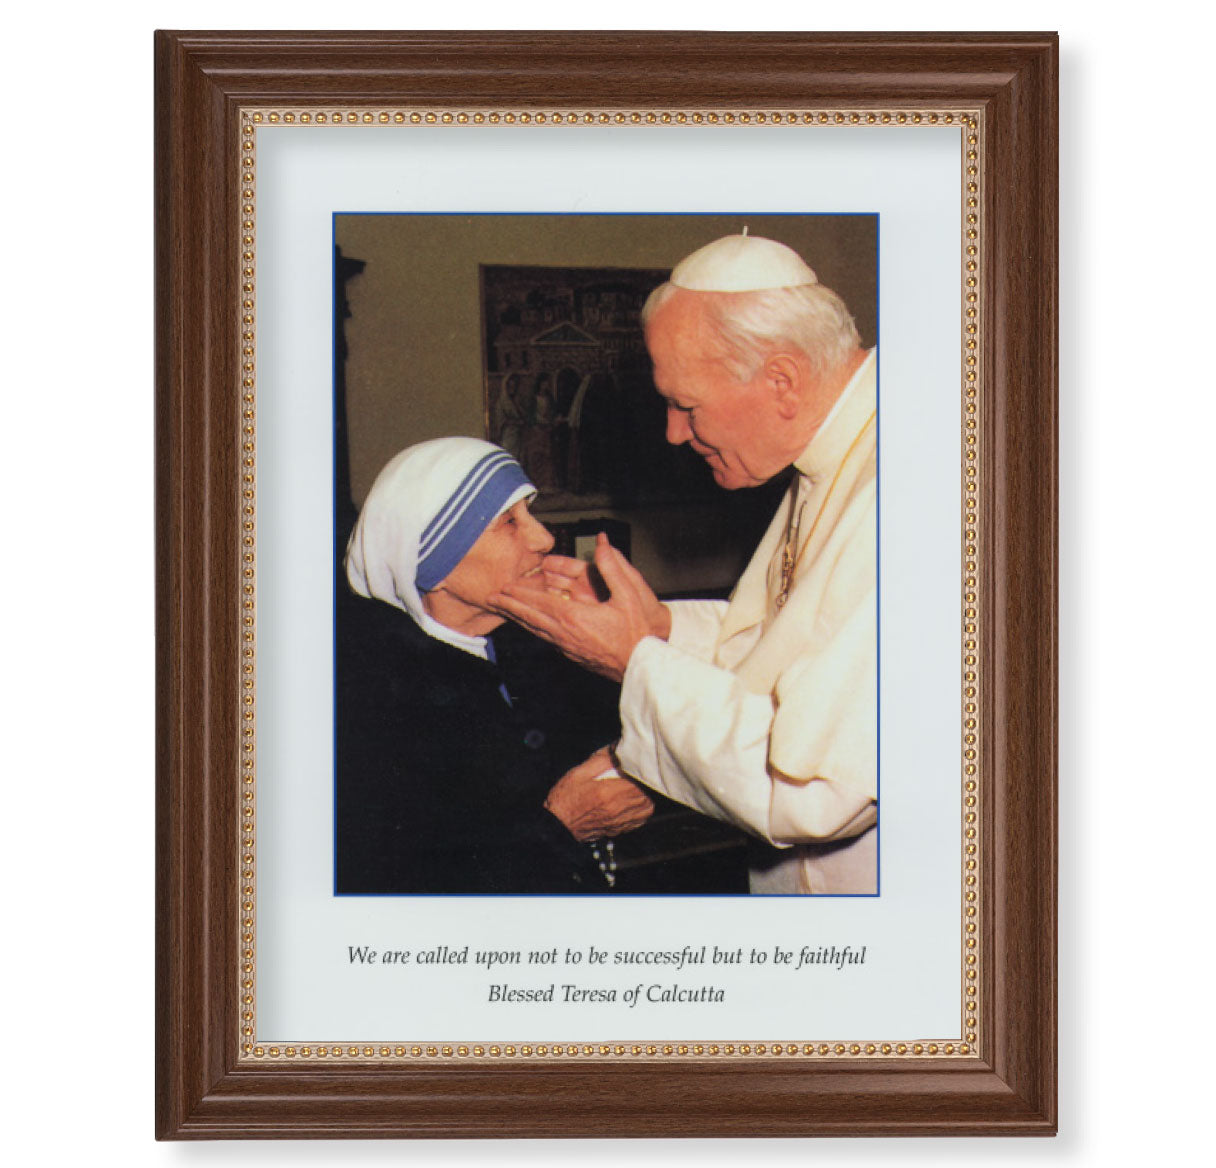 St. John Paul II & St. Teresa of Calcutta Picture Framed Wall Art Decor Extra Large, Classic Dark Walnut Finished Frame with Gold Beaded Lip